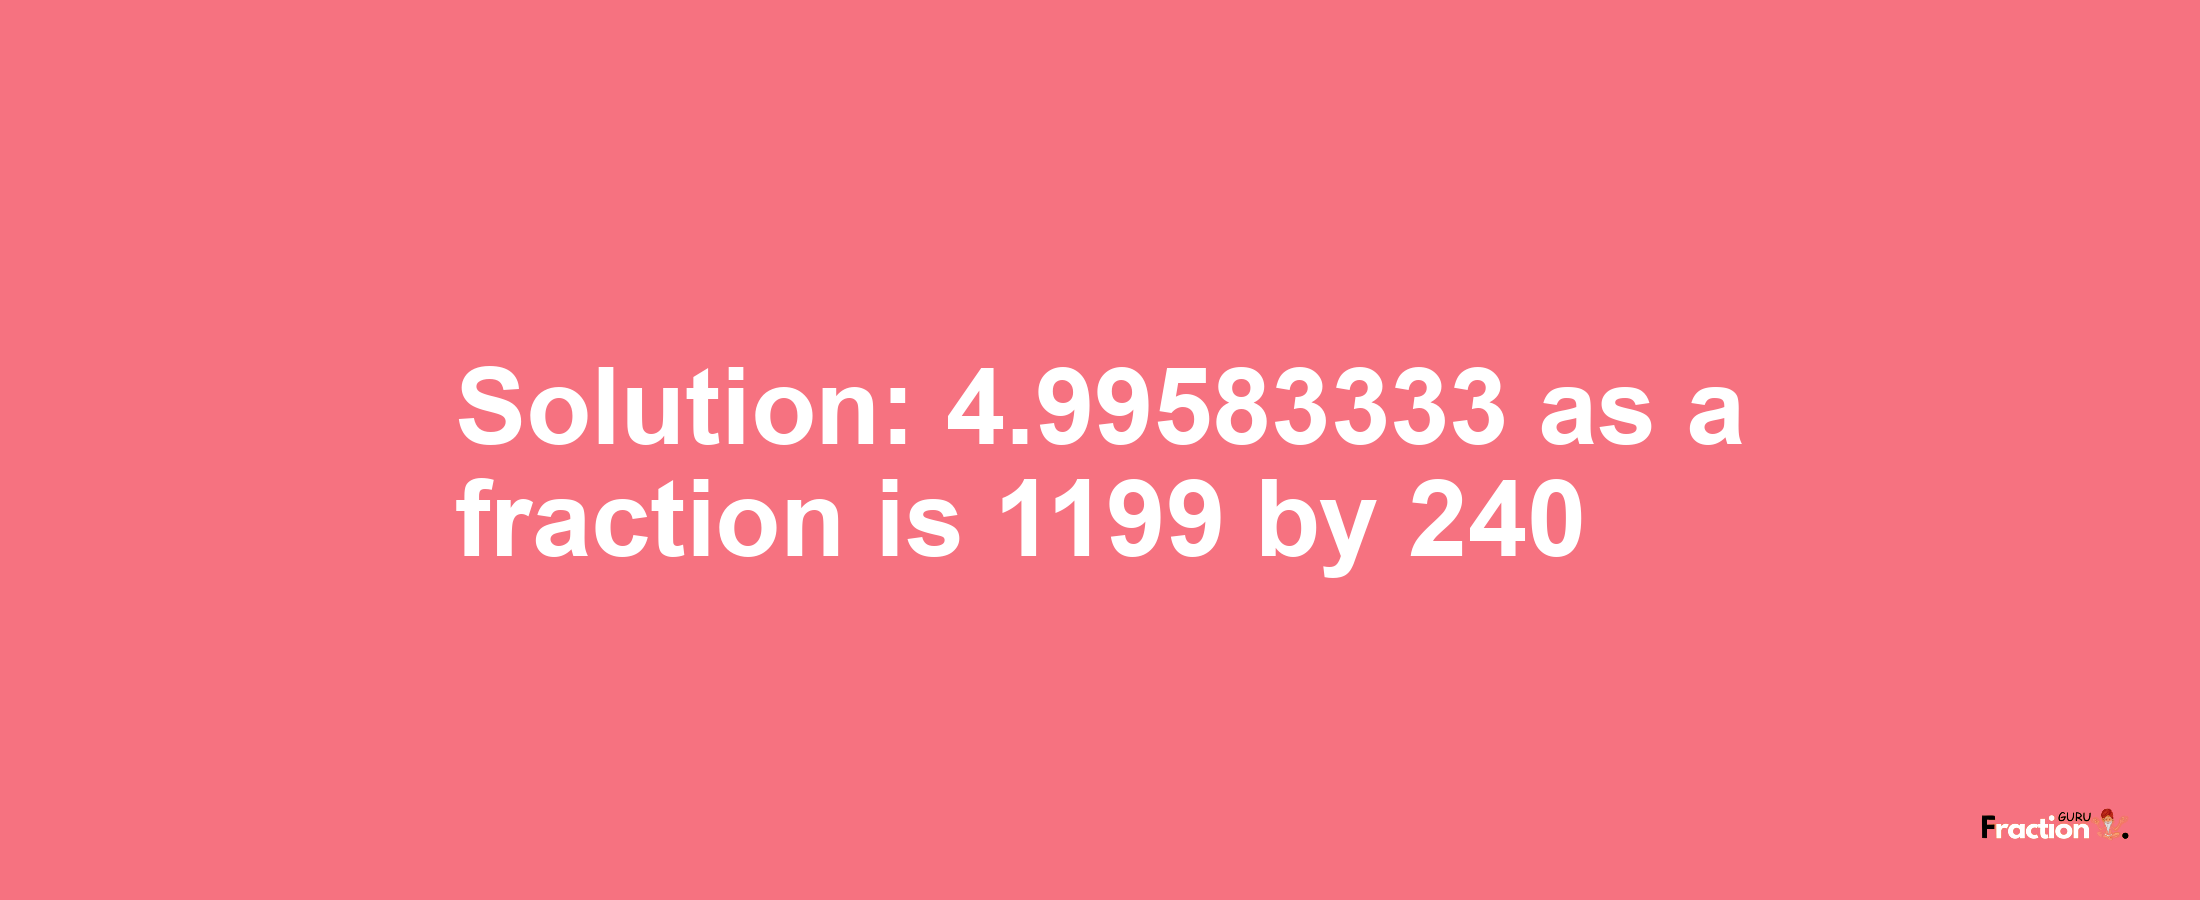 Solution:4.99583333 as a fraction is 1199/240